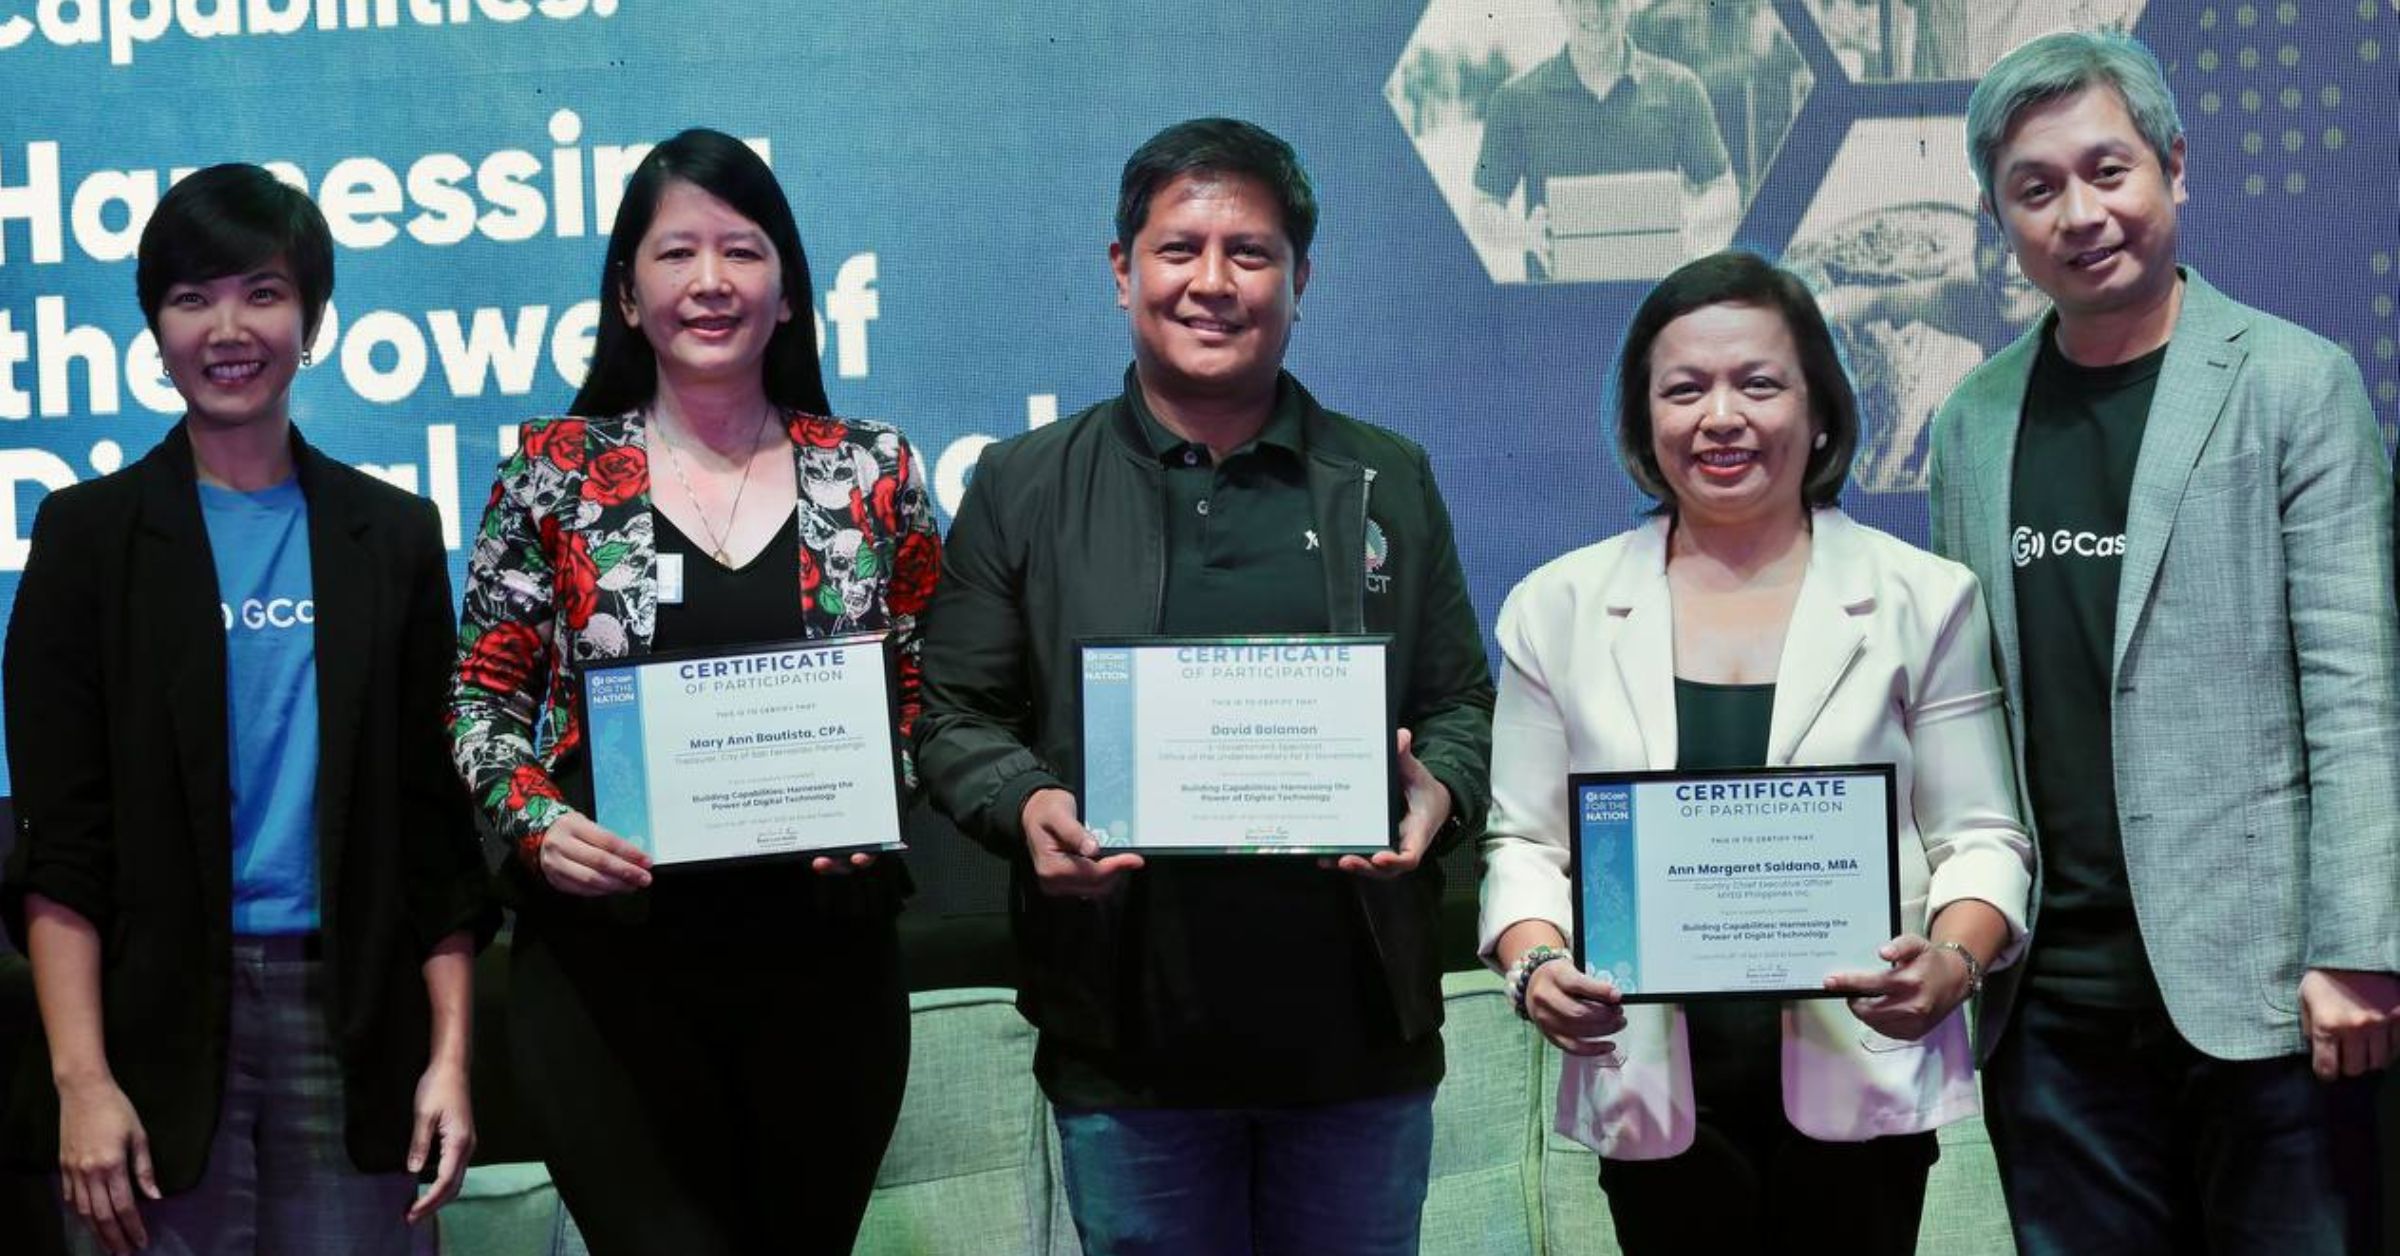 INNOVATIONS. (From left) AVP for Public Sector Partnerships Cathlyn Pavia, San Fernando City treasurer Mary Ann Bautista, Department of Information and Communications Technology e-government specialist David Balamon, MyEG Philippines, Inc. CEO Ann Margaret Saldana, and Vice President for Commercial Operations Luigi Reyes.